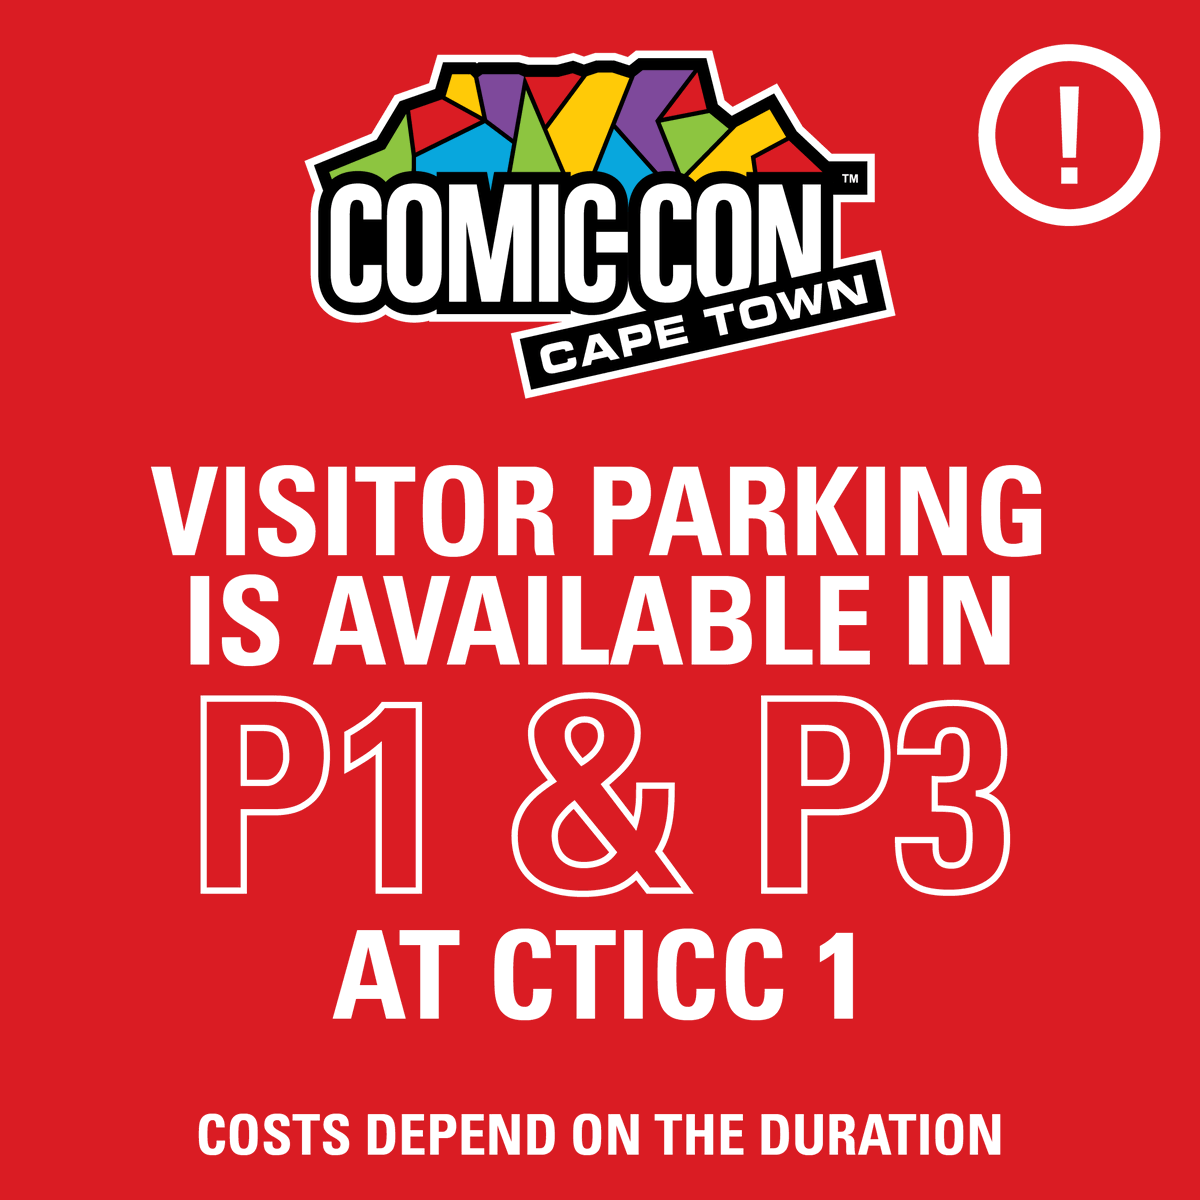 Visitor parking is available in P1 and P3 at CTICC 1, costs depend on duration! 🚗